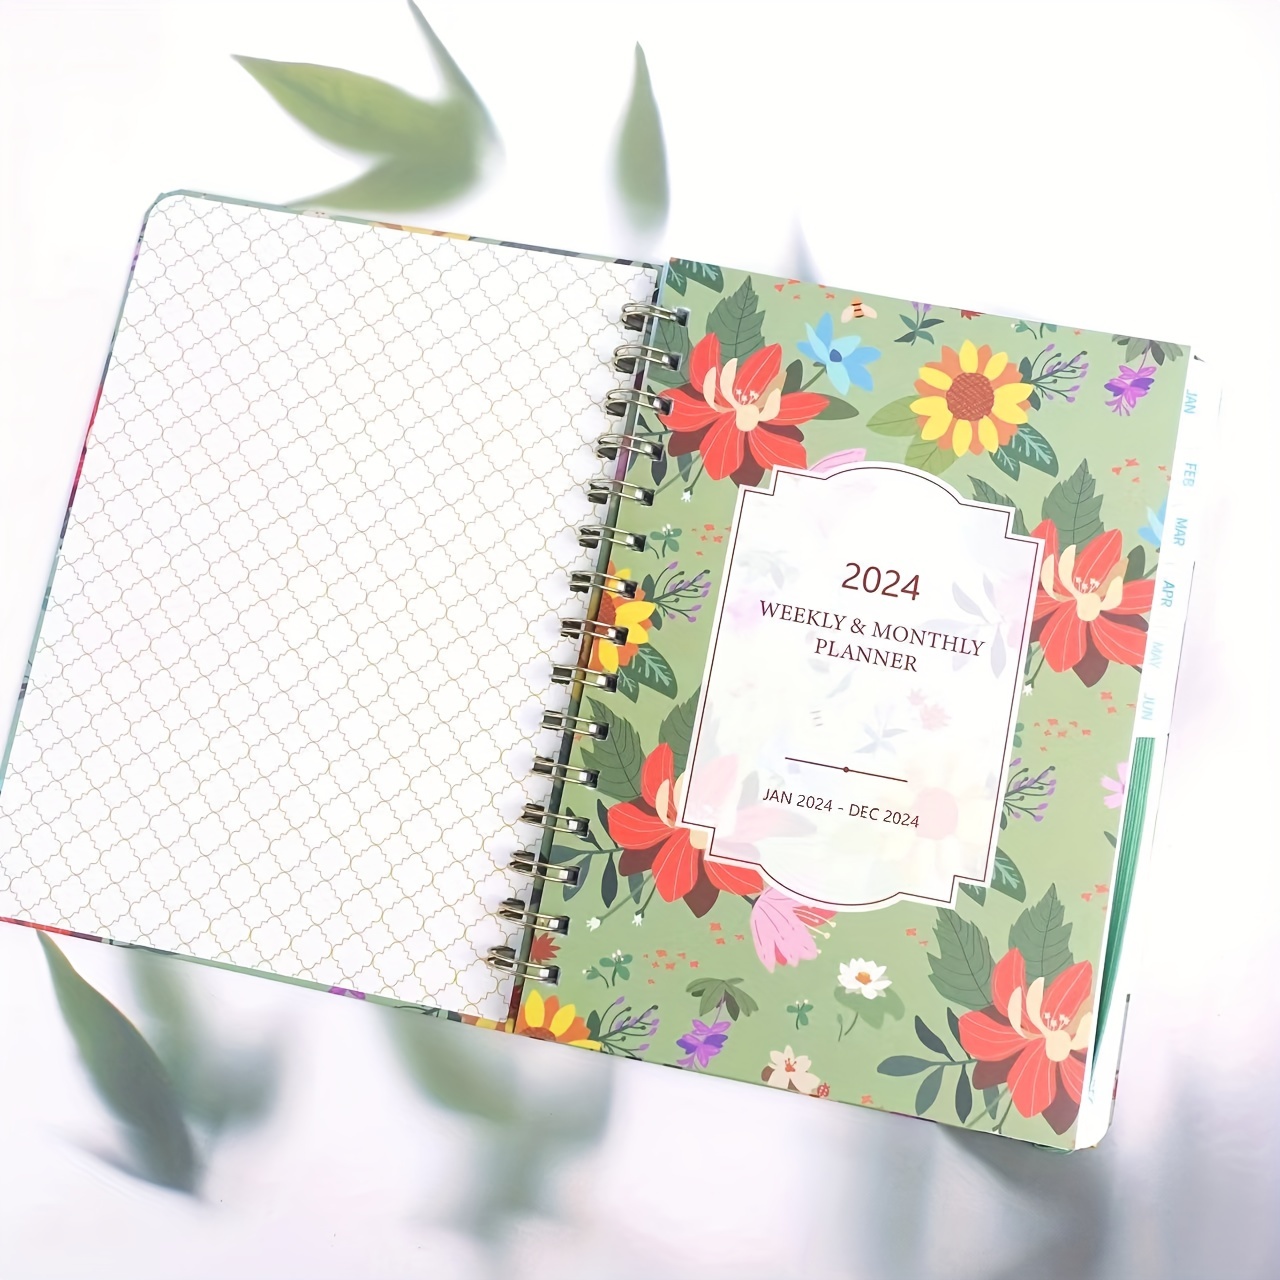 1pc 2024 Monthly Planner For Woman, Daily And Weekly Planner, Agenda 2024  From Jan To Dec 2024 A5 Size